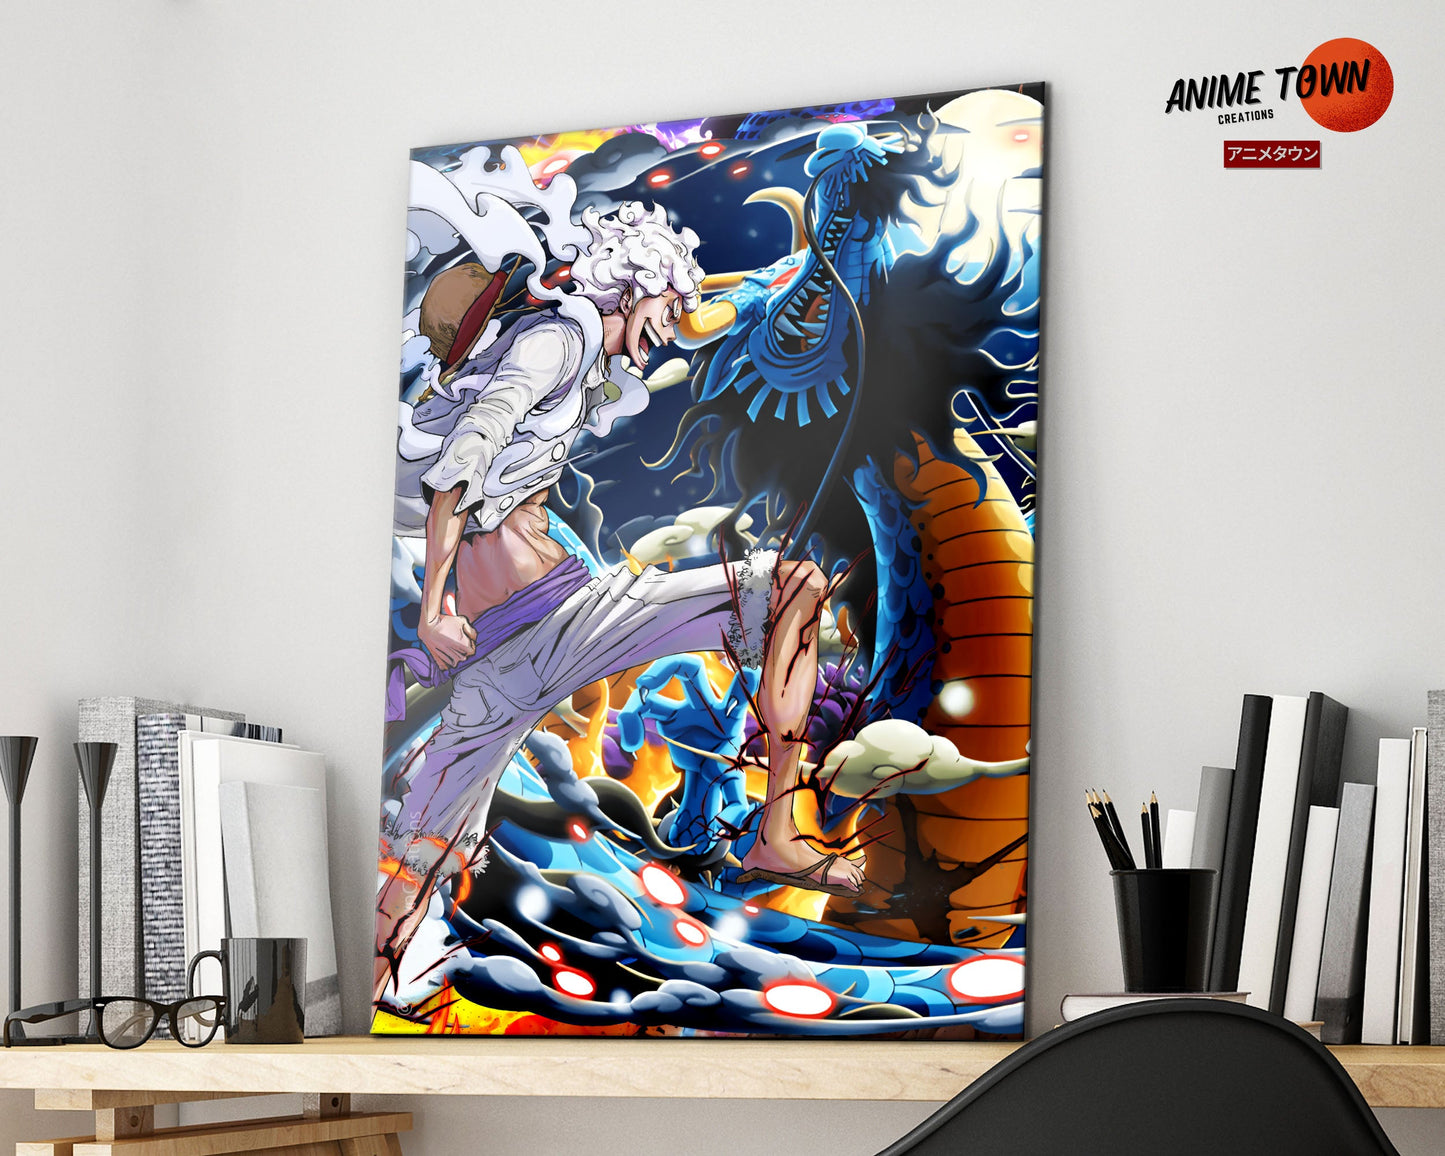 Anime Town Creations Metal Poster One Piece Luffy Gear 5 vs Kaido 16" x 24" Home Goods - Anime One Piece Metal Poster